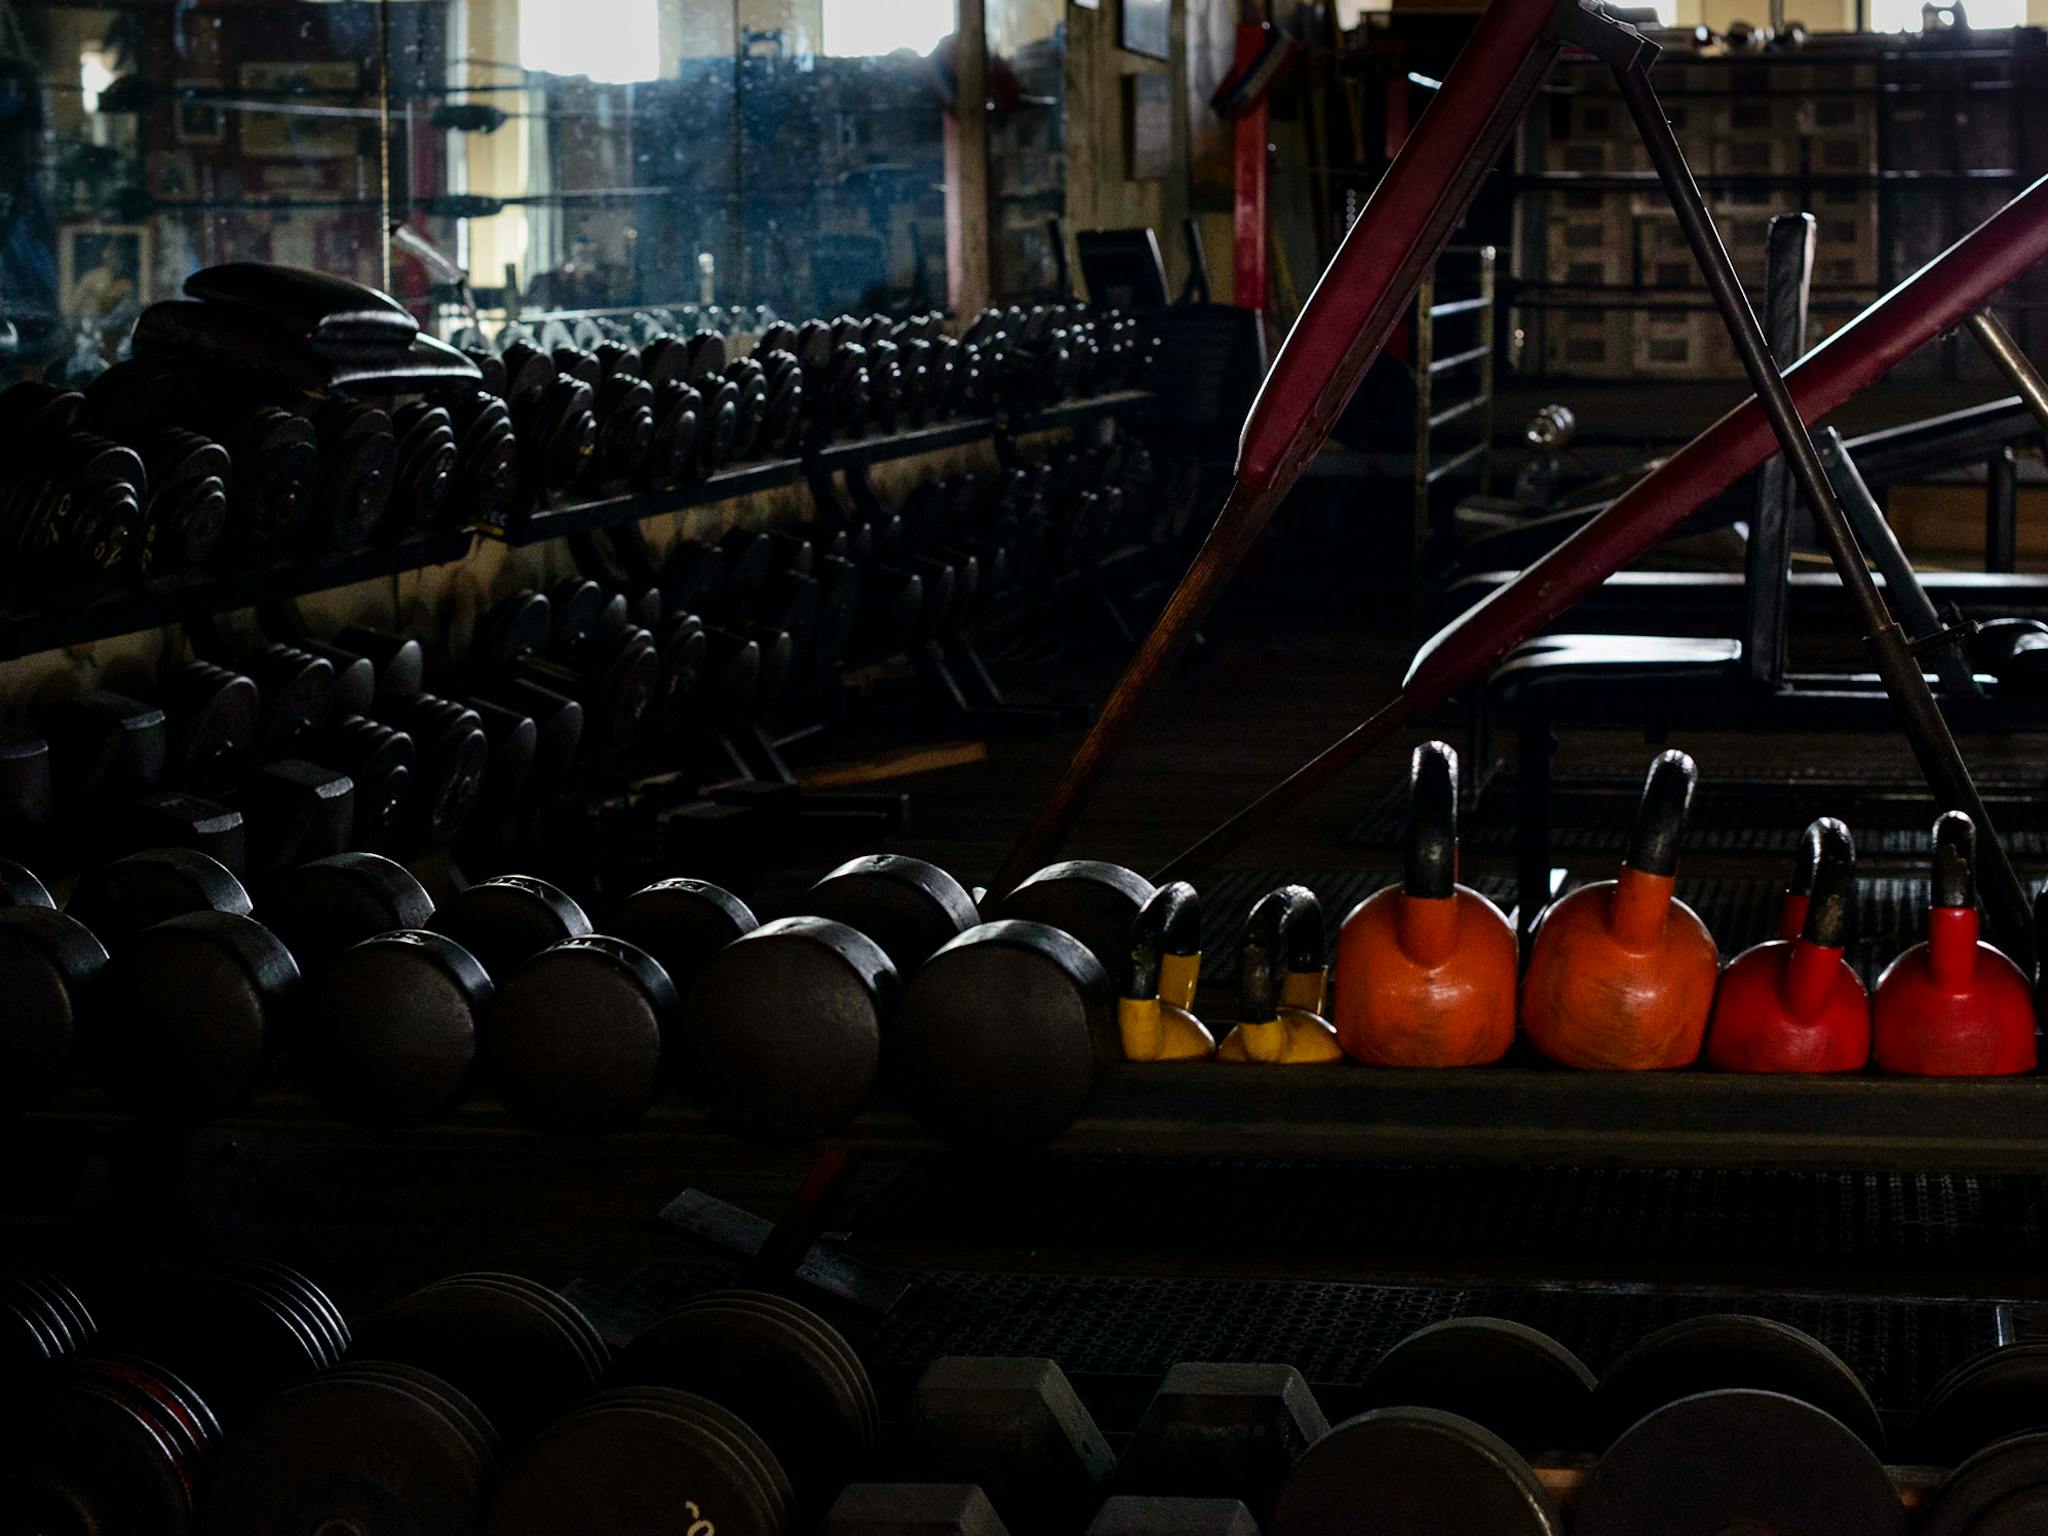 Compared to today’s bright, spare, high-tech gyms christened with Internet start-ups names like Telos and Paradigm, Doug’s was positively medieval: Nothing white, nothing plastic; all leather, wood, and aged metal. This picture of a small sea of dumbbells hints at just how much weight was on the floor—12,000 to 15,000 pounds, by Eidd’s estimate. The light on those candy-colored kettlebells hits like a neon motel sign on a dark, lonely road.